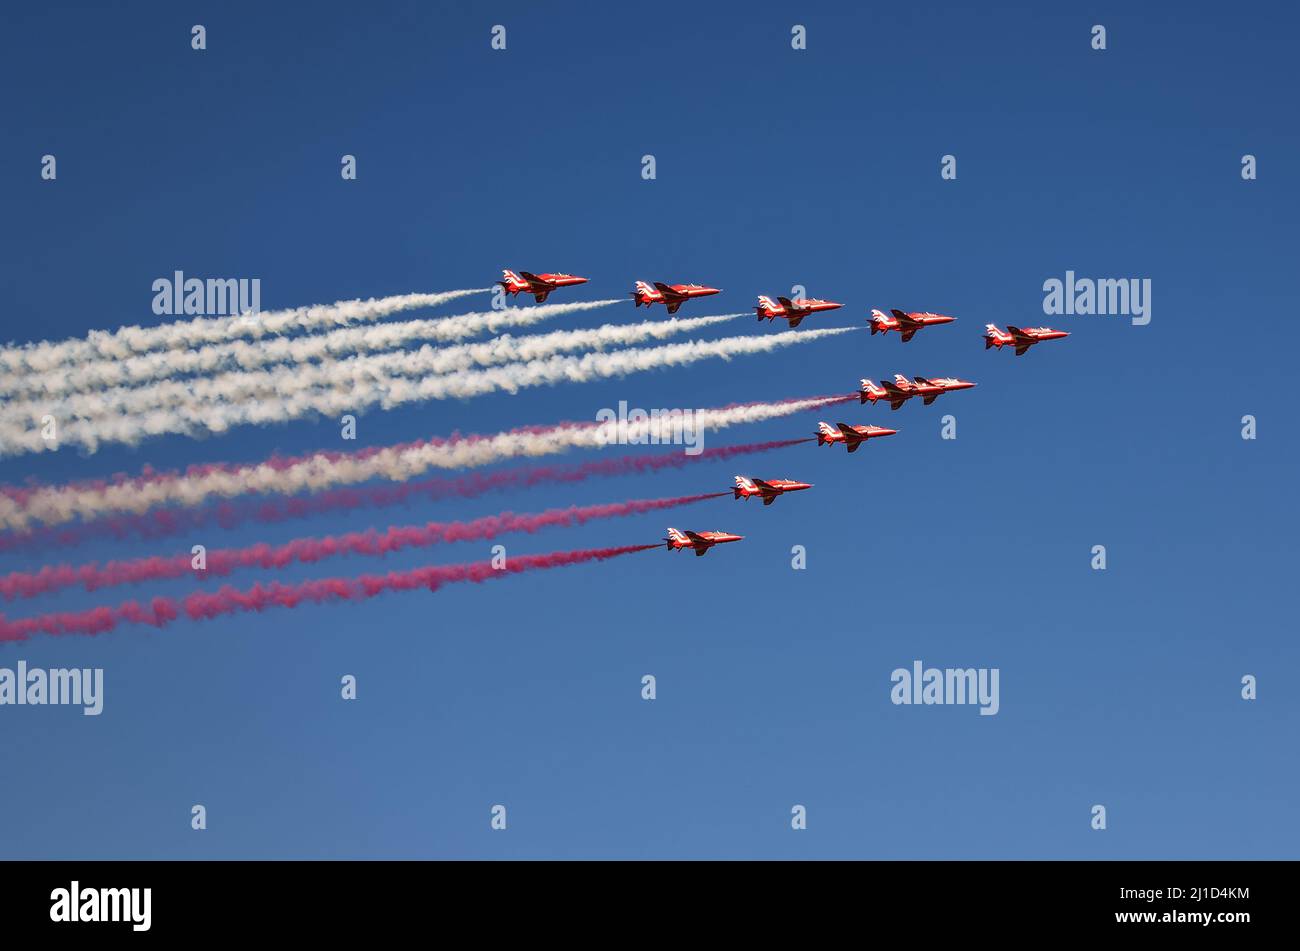 Gdynia, Poland - August 22, 2021: The Royal Air Force Aerobatic Team of the United Kingdom at the Aero Baltic show in Gdynia, Poland. Stock Photo